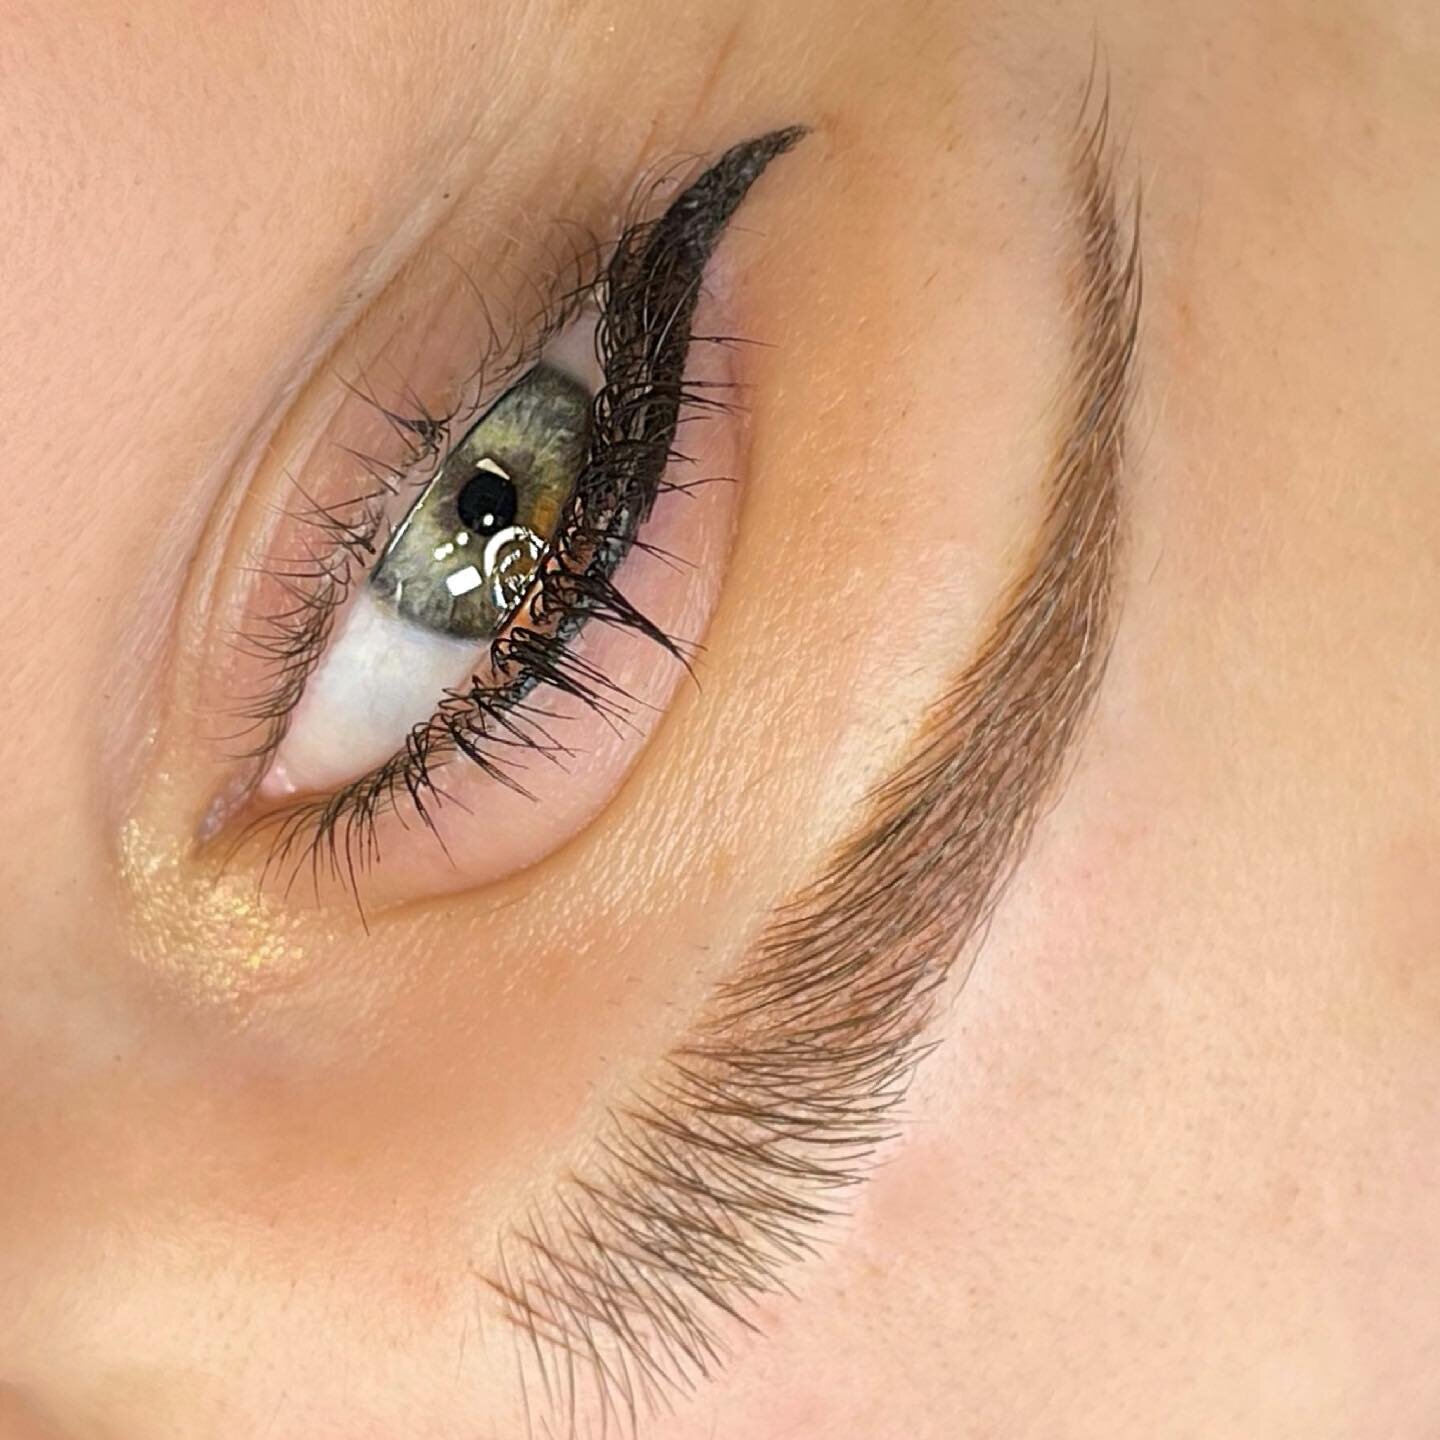 What&rsquo;s currently your #1 most listened to song right now? Tell me in the comments, I want to know💛 

#portlandoregonbrows #pdxpermanentmakeup #pdxpmu #microbladedbrows #beauty #tattooedbrows #tattoo #badassbrows #portlandoregontattoo #oregonmi